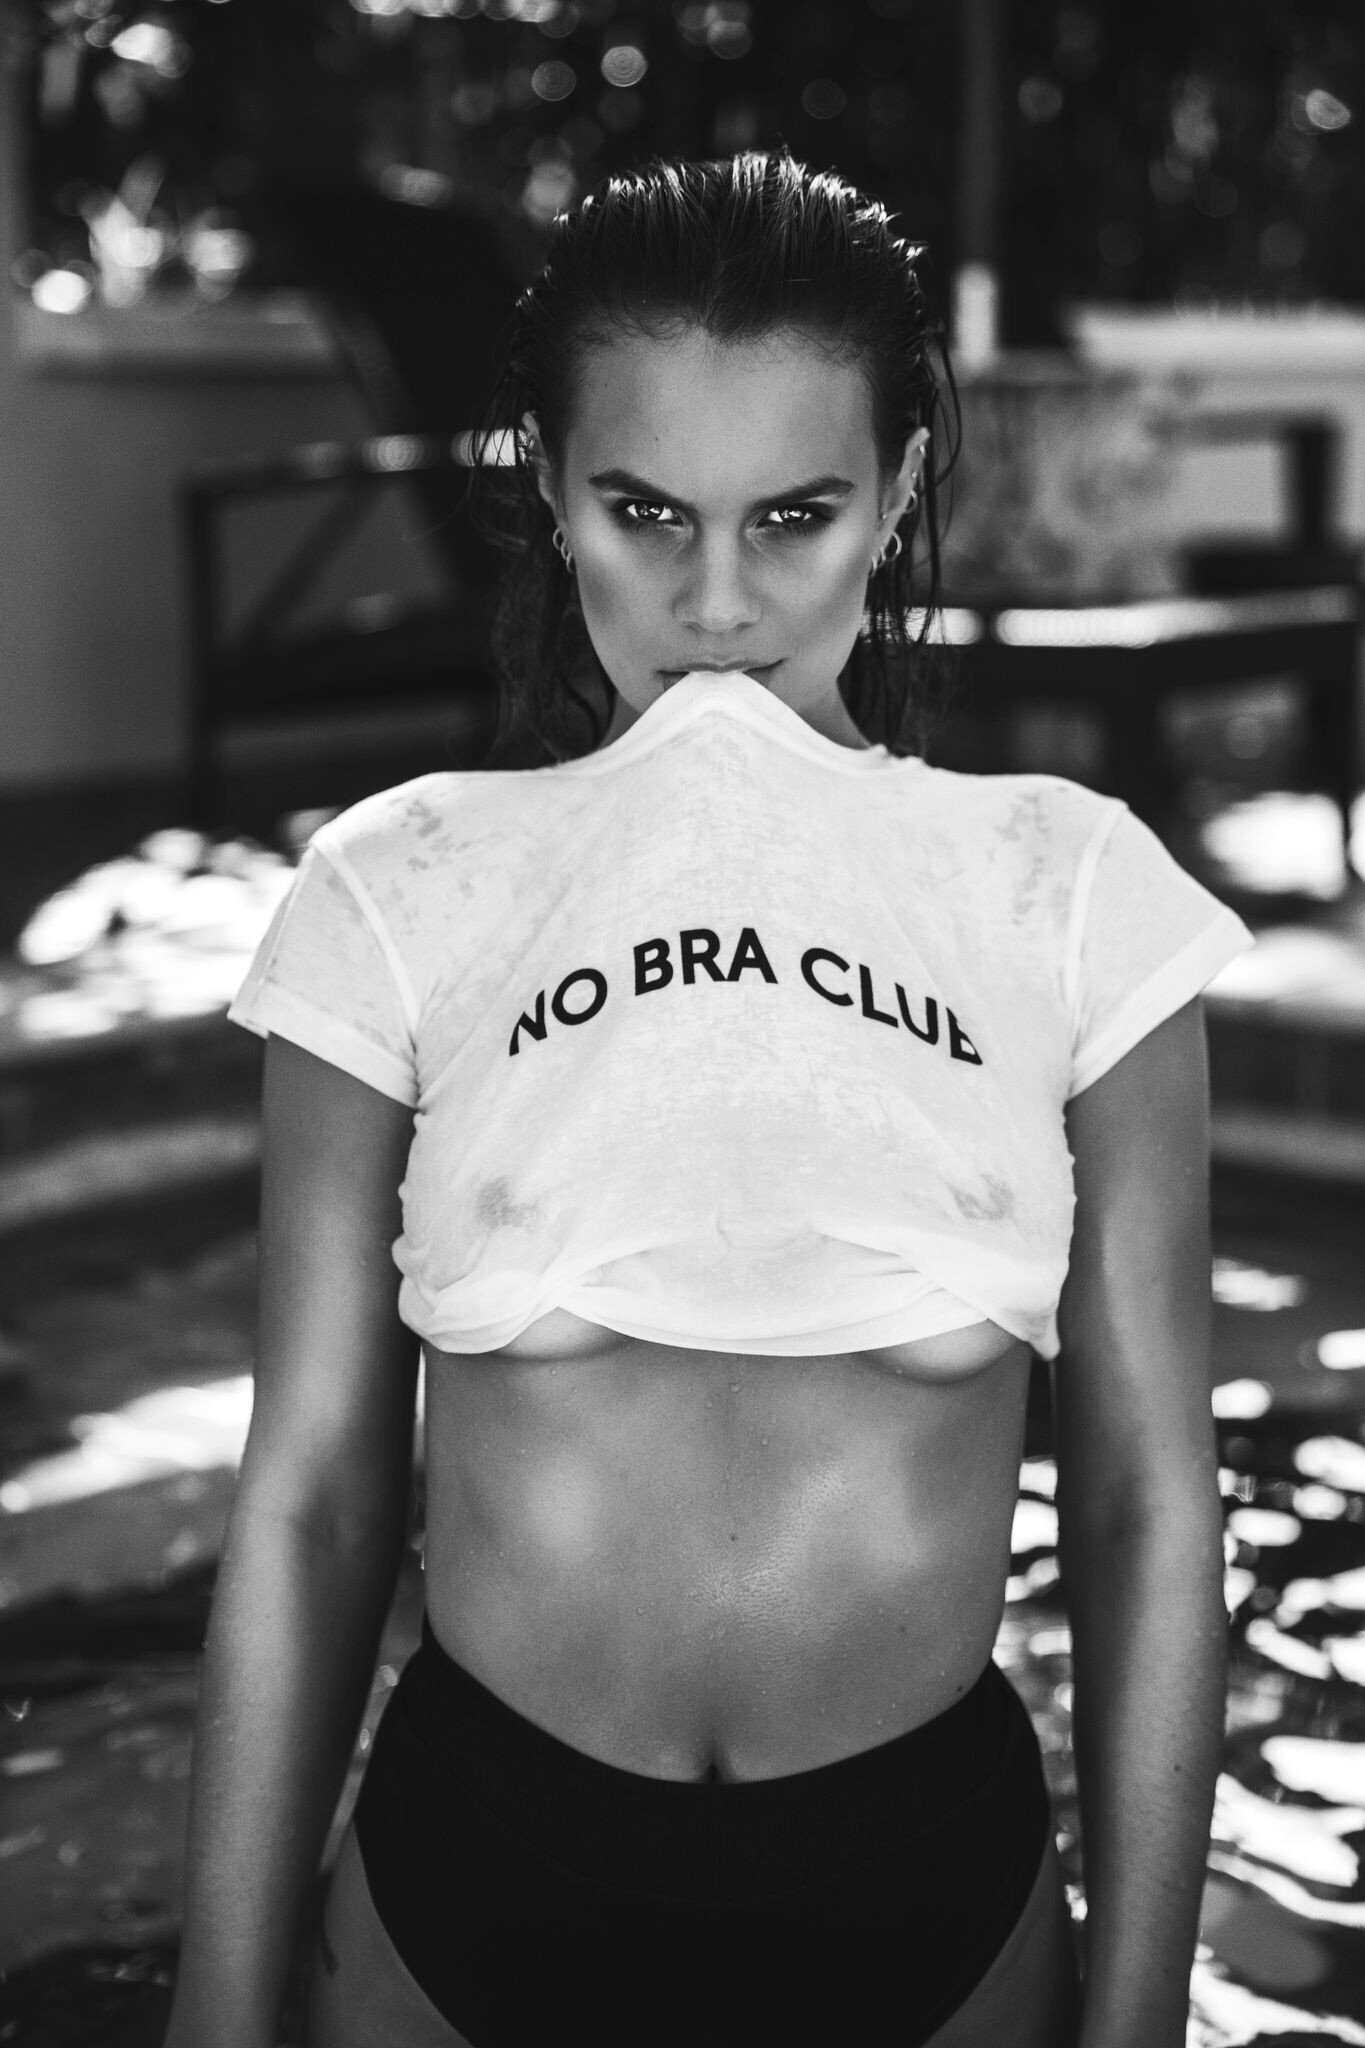 “leave Your Bra At Home” The “nobraclub” Movement Is On